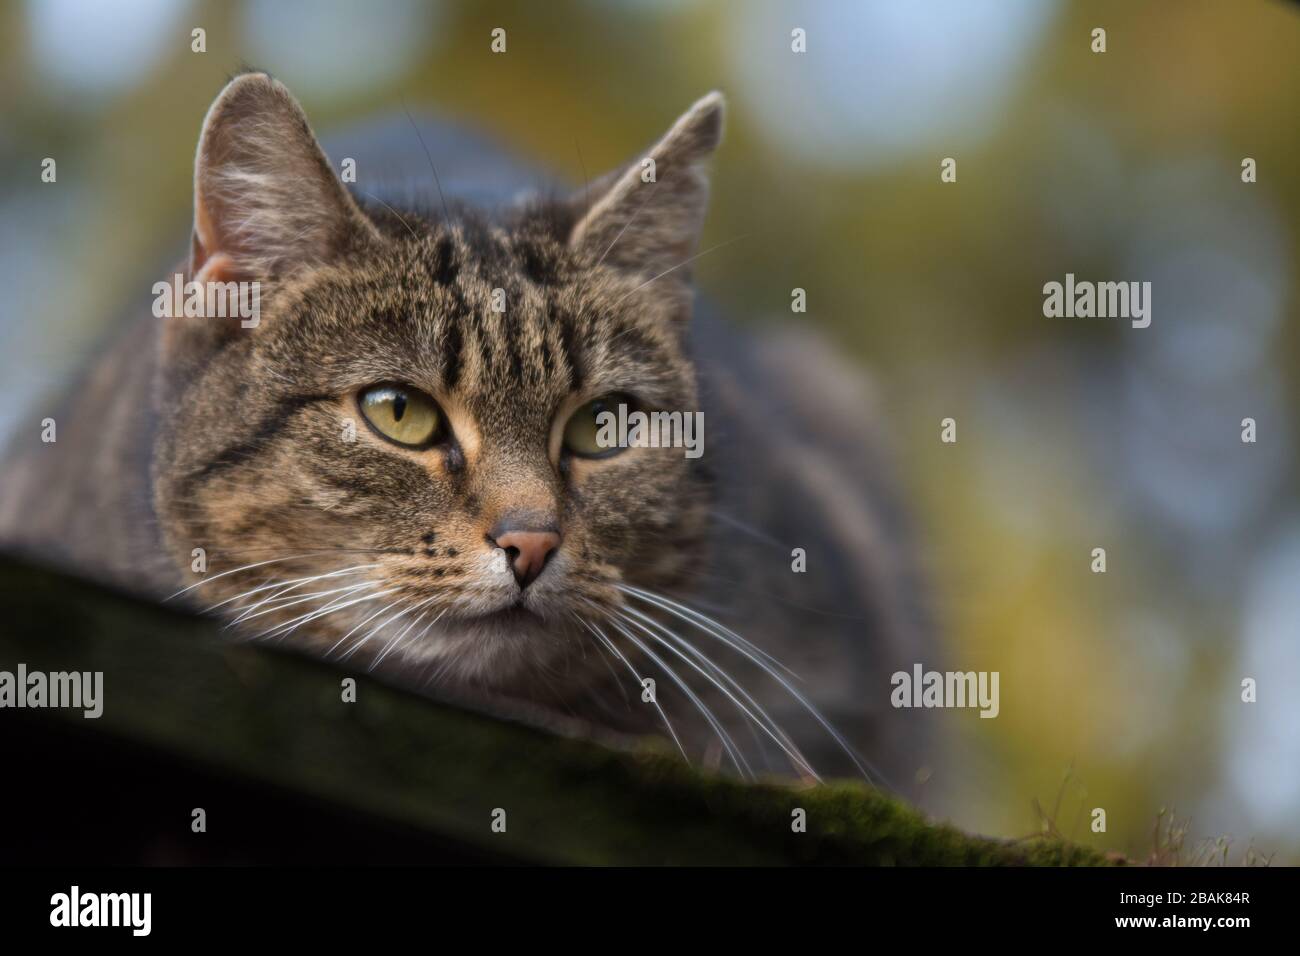 Close-up of a sprayed tabby cat alert watching something - copy space Stock Photo